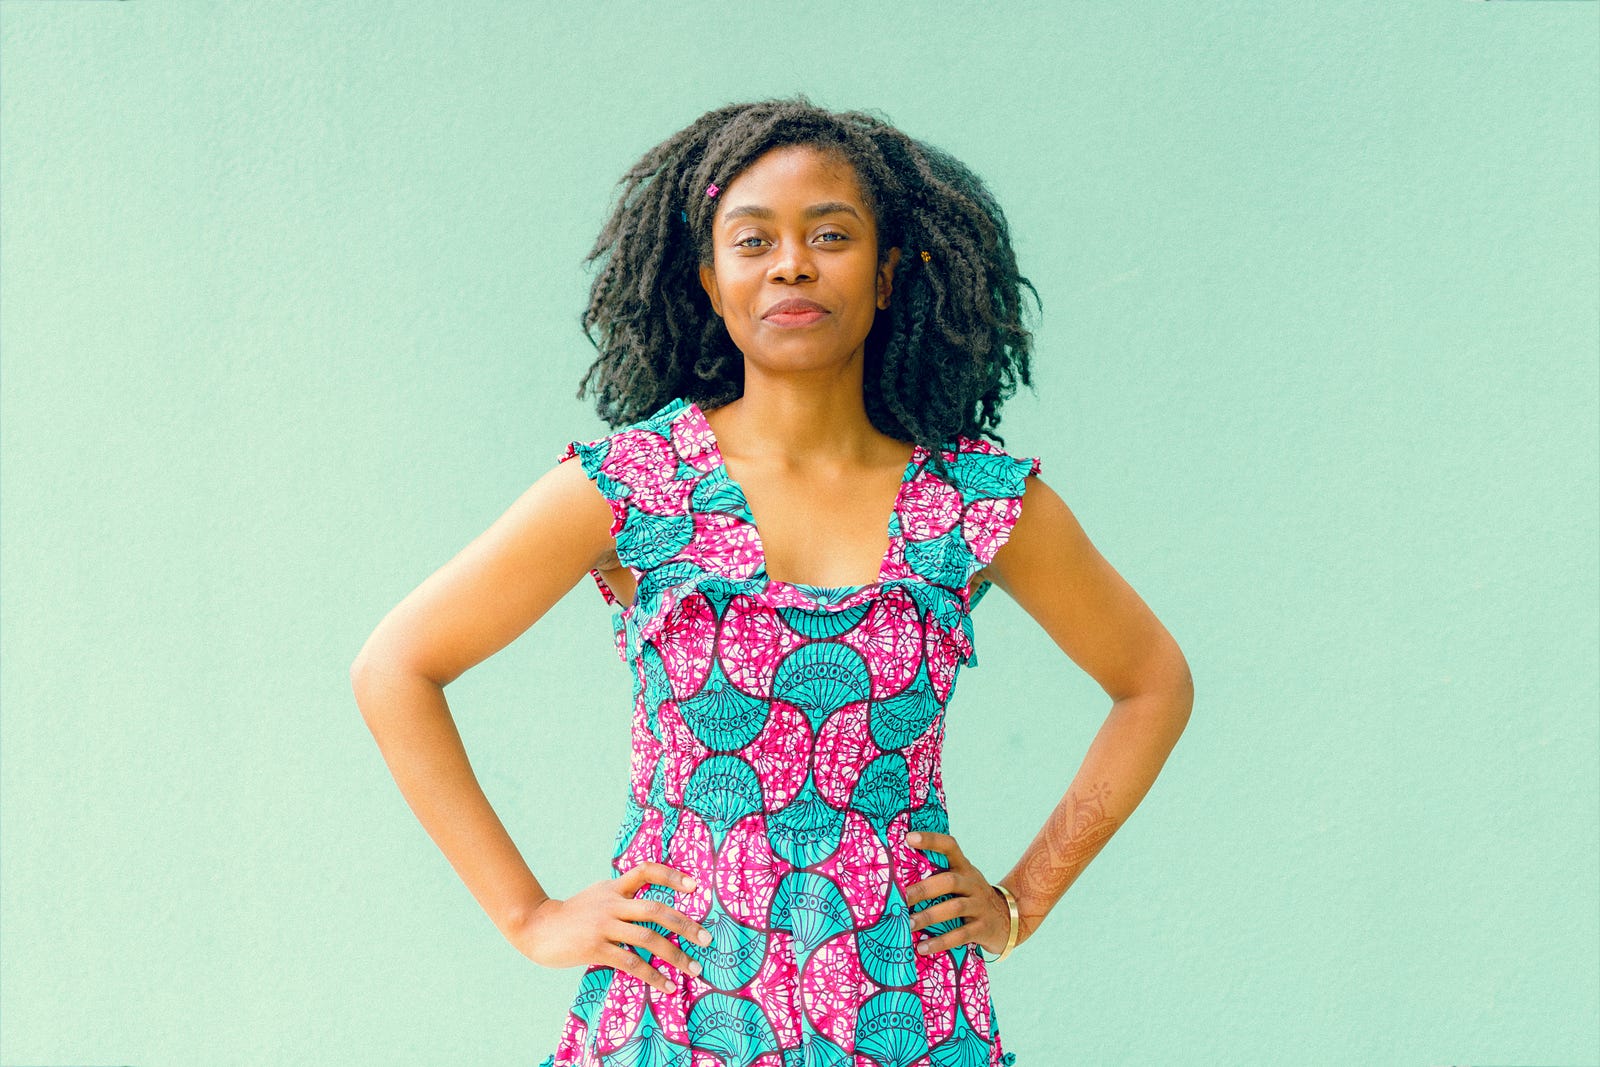 A young black woman faces us, hands on waist. She wears a pink and blue dress with geometric patterns. Light green background. Colorectal incidence and mortality is rising among young adults.